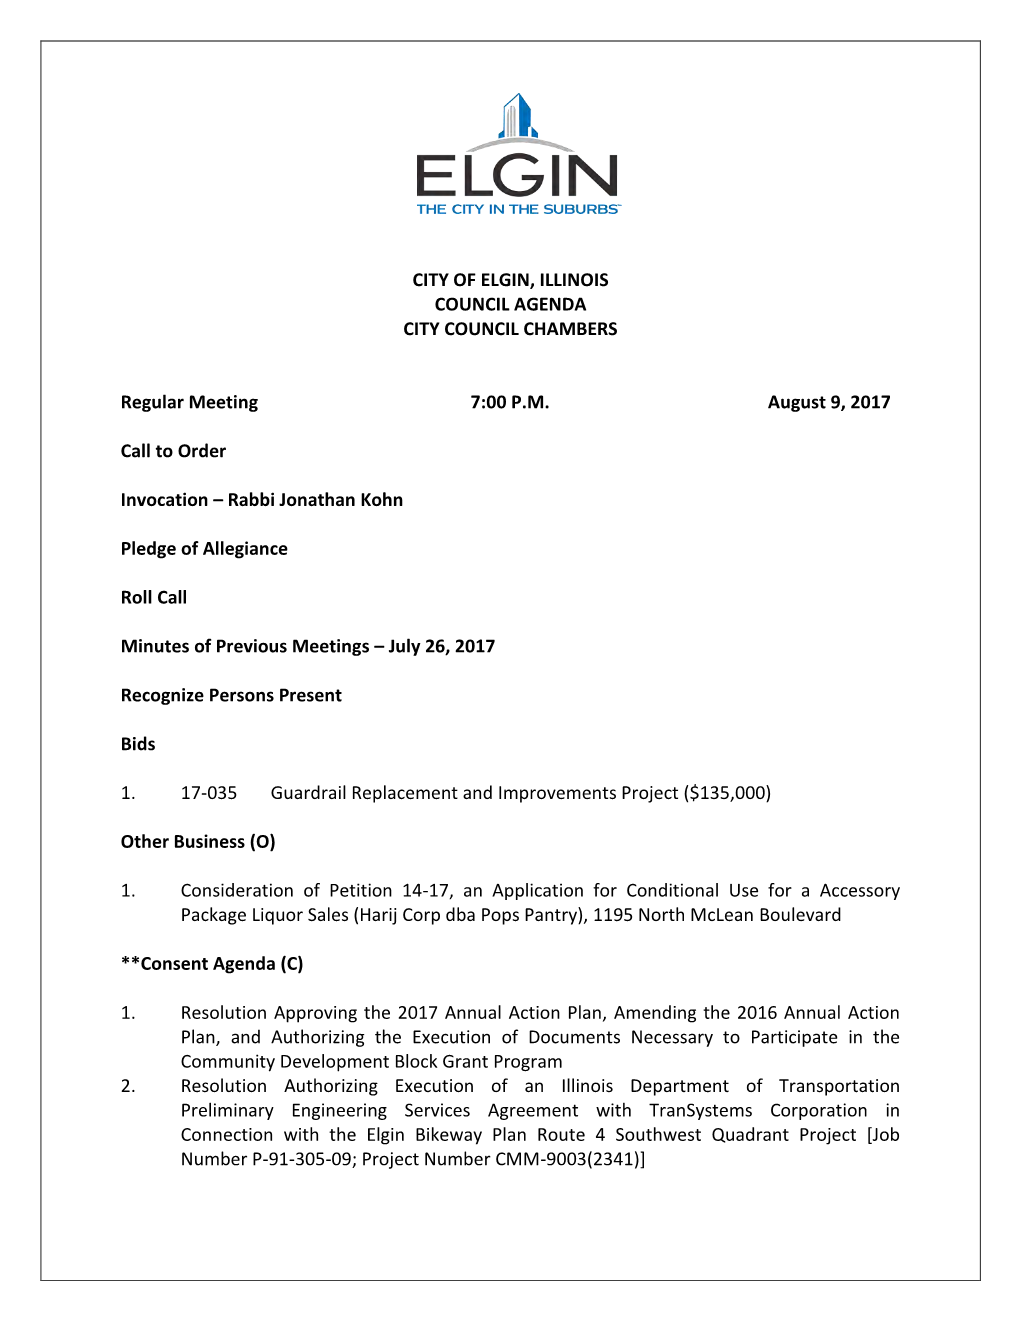 CITY of ELGIN, ILLINOIS COUNCIL AGENDA CITY COUNCIL CHAMBERS Regular Meeting 7:00 P.M. August 9, 2017 Call to Order Invocation